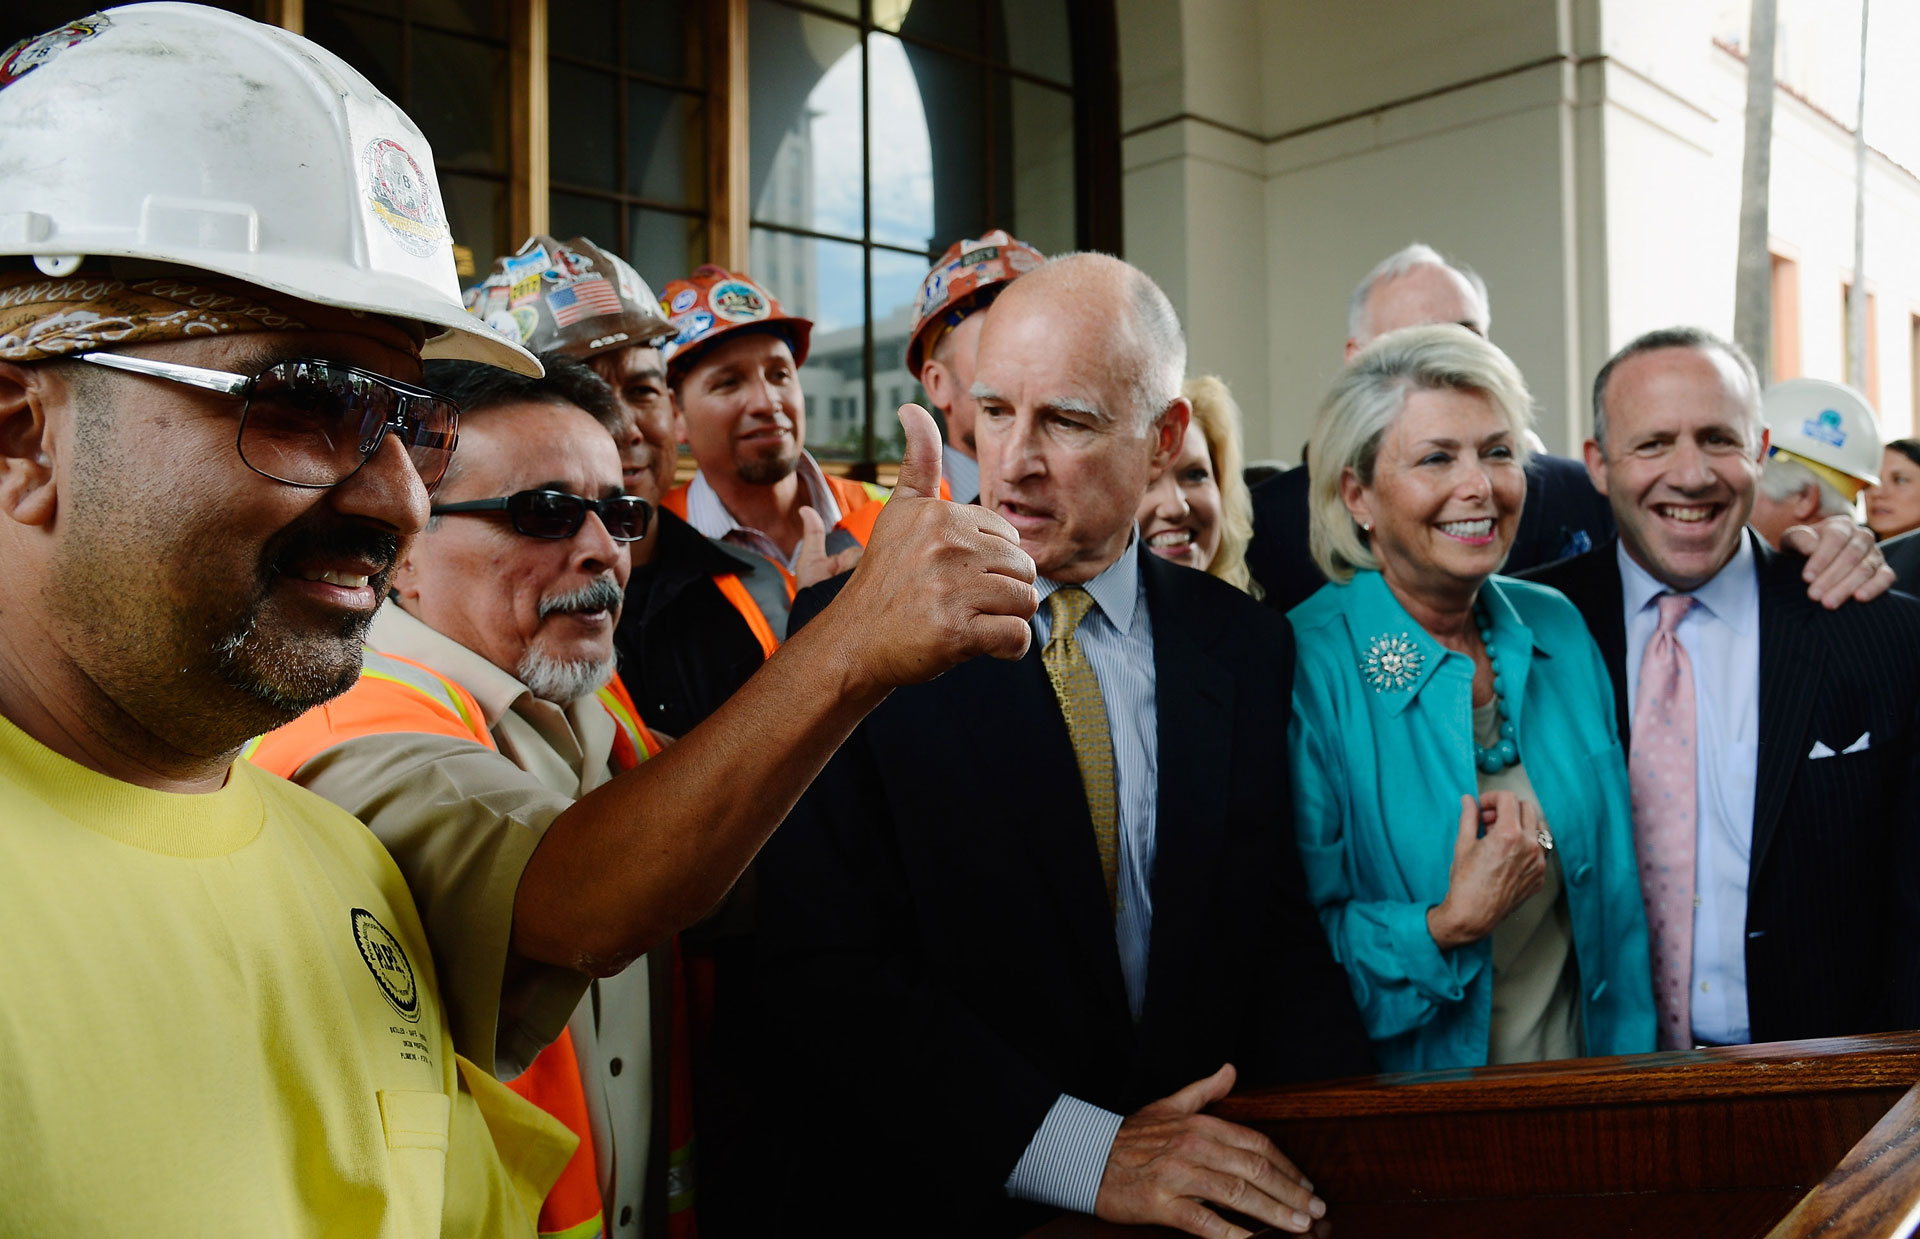 Gov. Jerry Brown is surrounded by construction workers and elected officials after signing legislation authorizing initial construction of the high-speed rail line at Union Station on July 18, 2012 in Los Angeles.